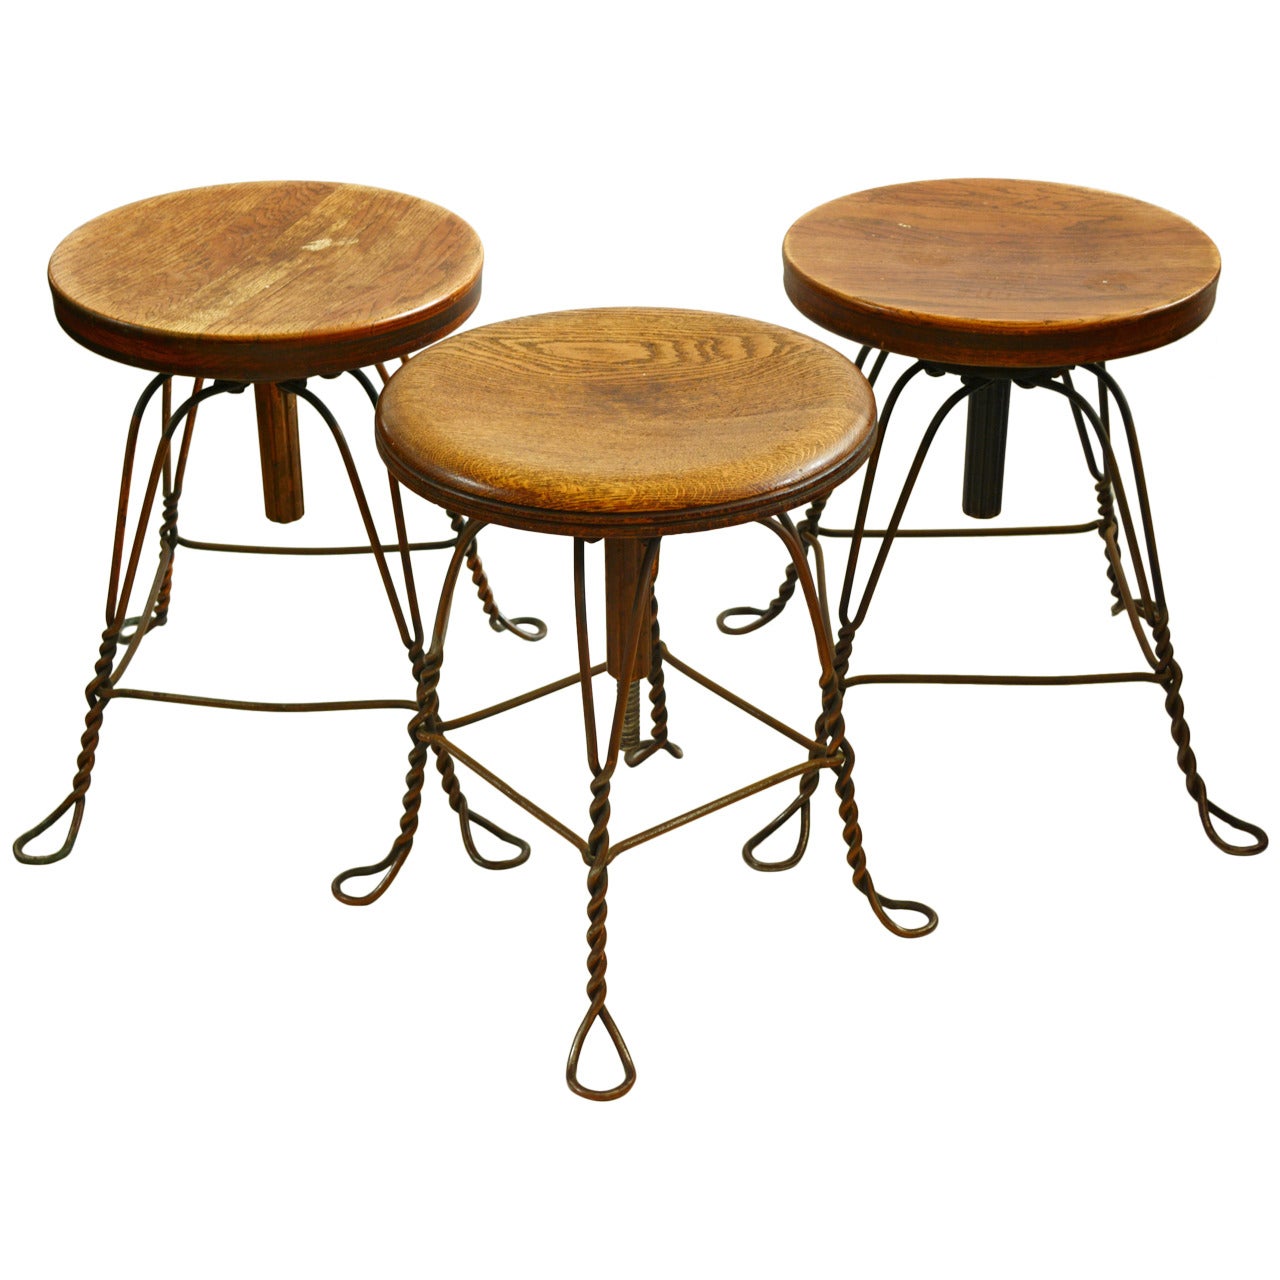 Industrial Twisted Steel Wire Stools